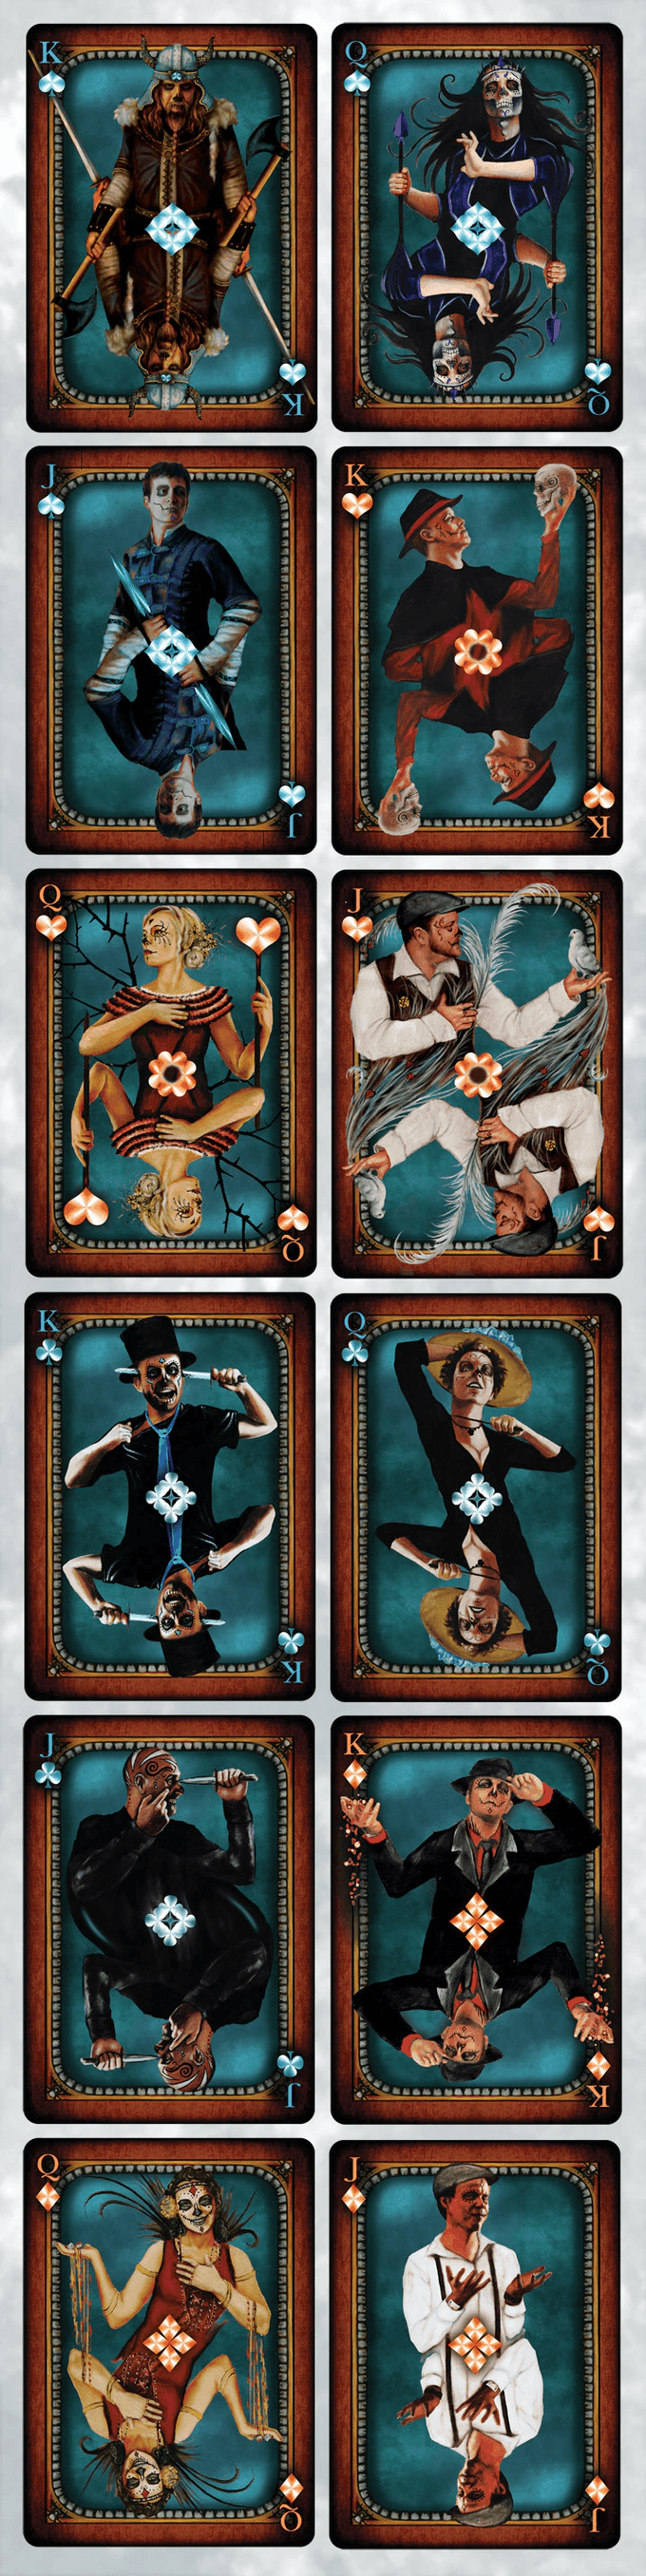 Bicycle Day of The Dead Playing Cards by Bicycle Playing Cards